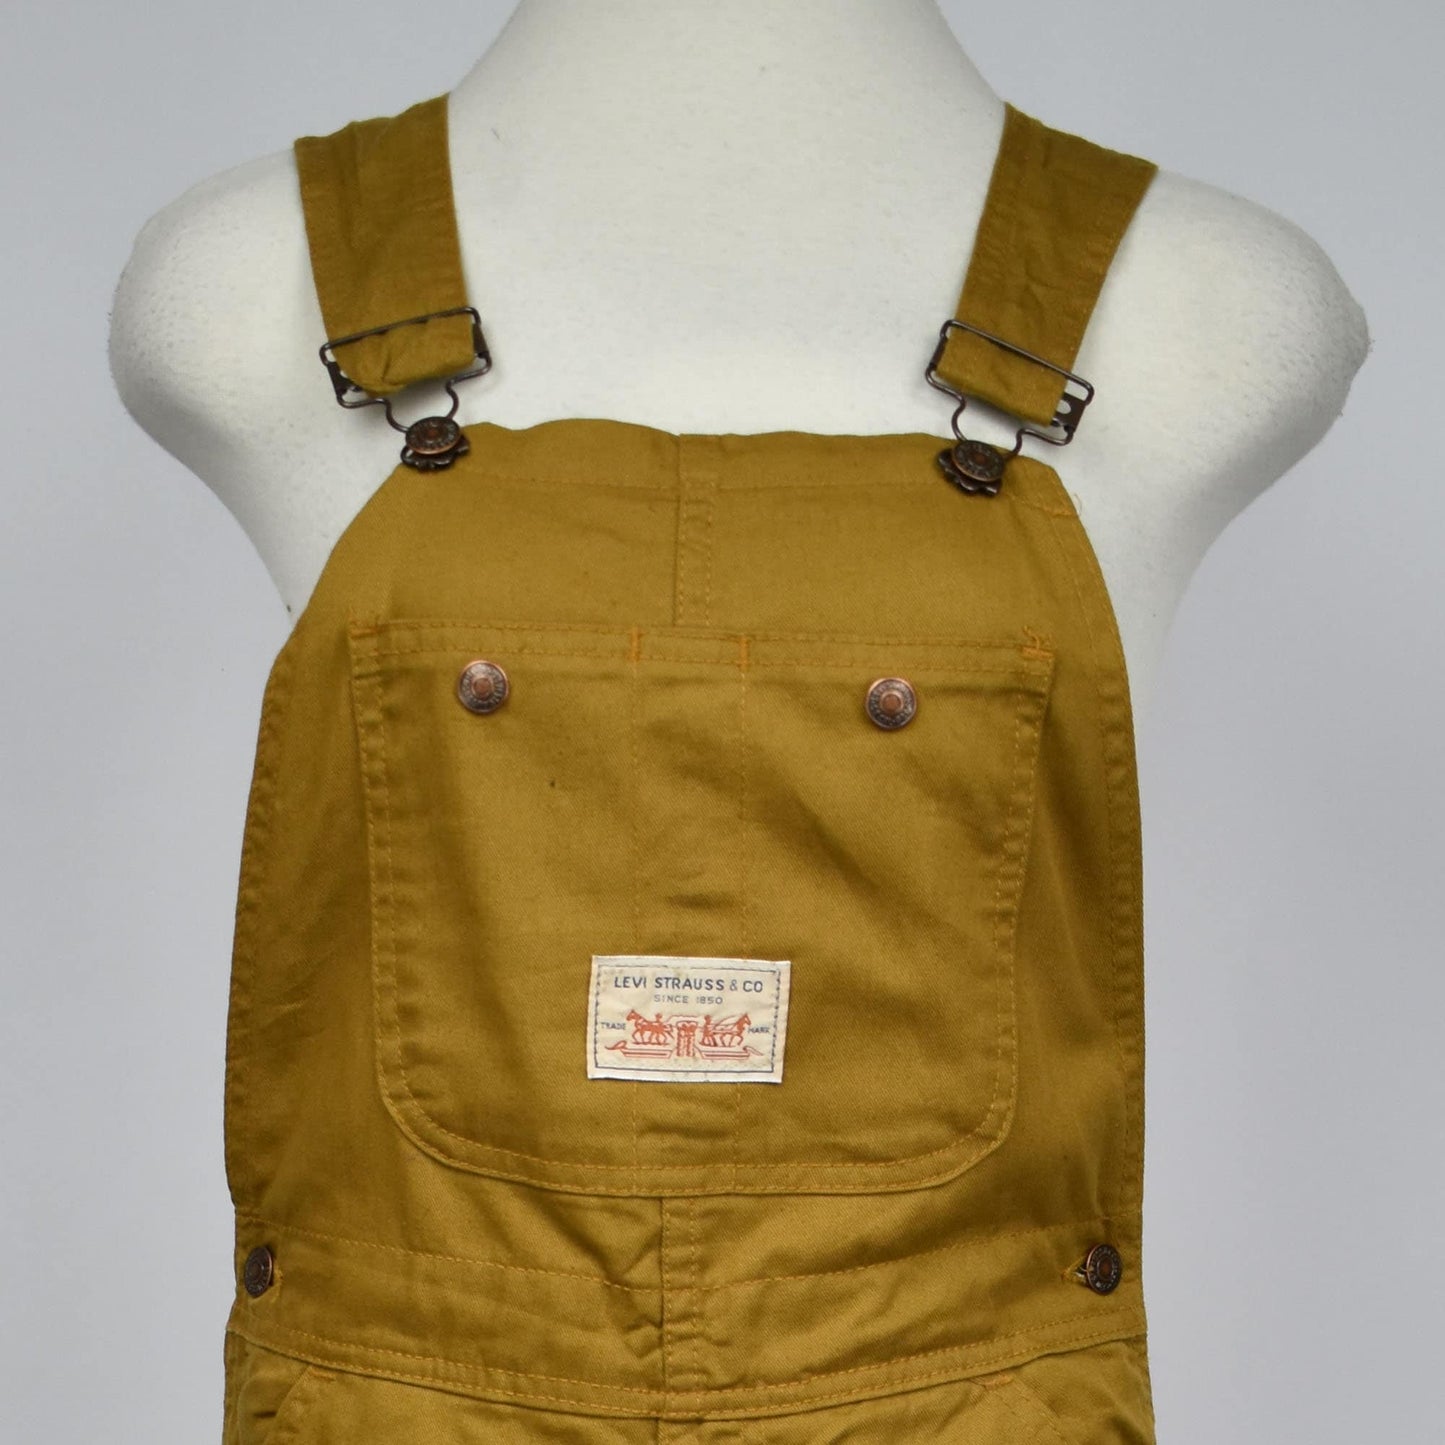 Vintage 50s 60s Caramel Levi's Overall - Made in USA - Big E Tab - 29" Waist